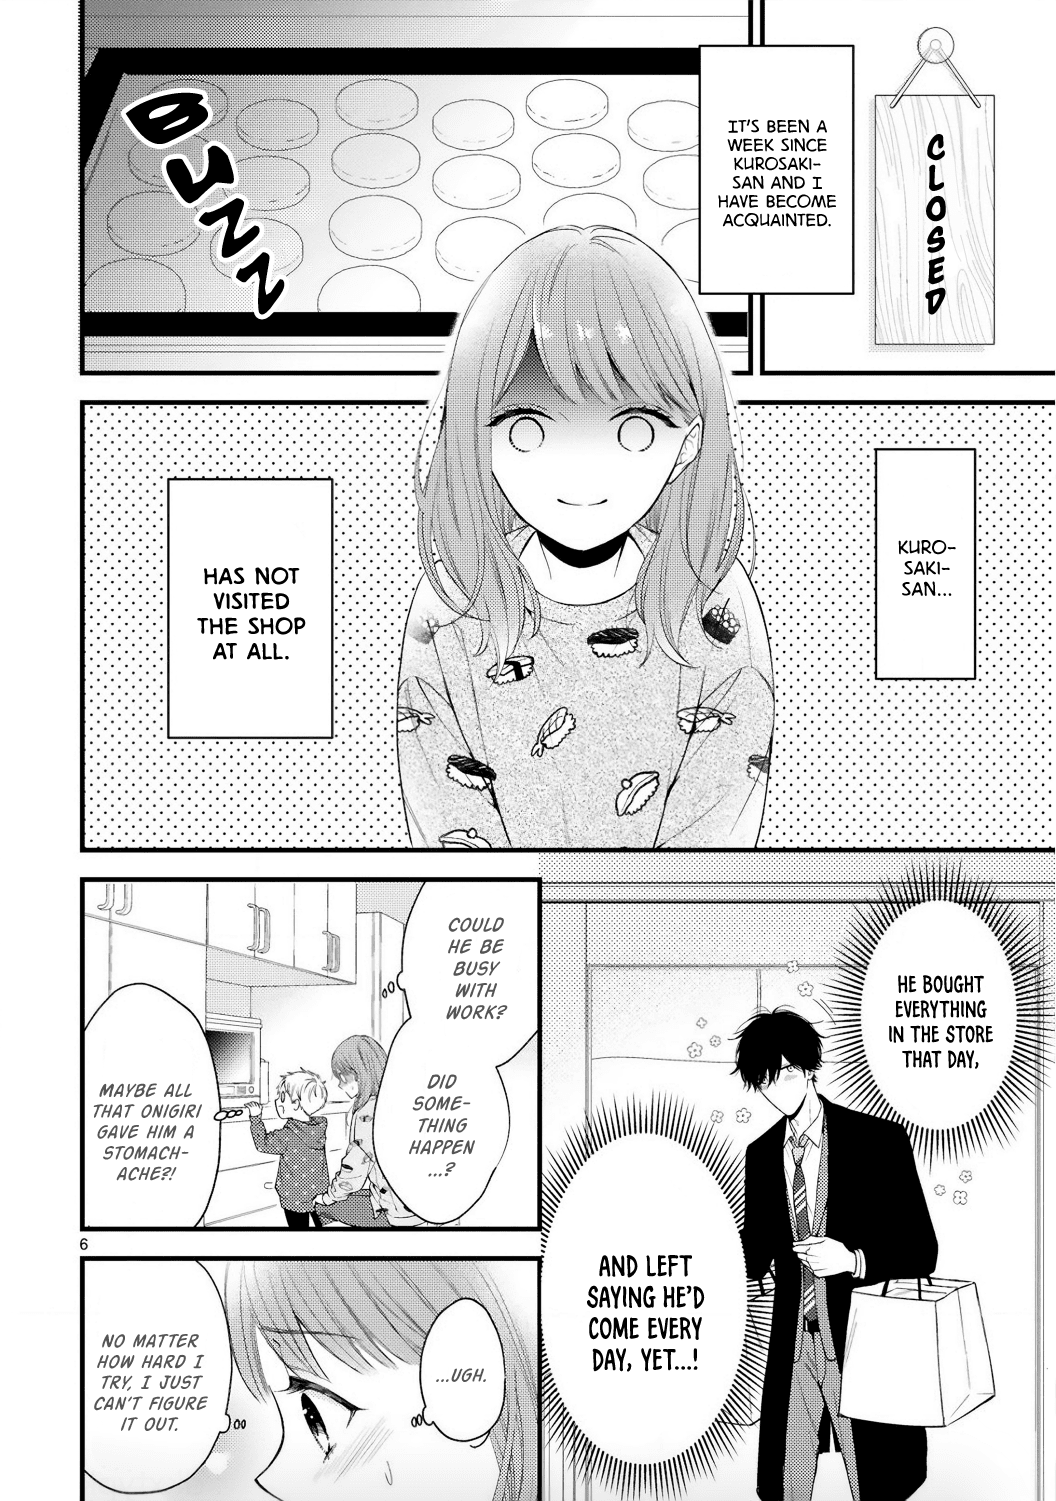 Kurosaki-San's Single-Minded Love Is Unstoppable chapter 2 - page 6